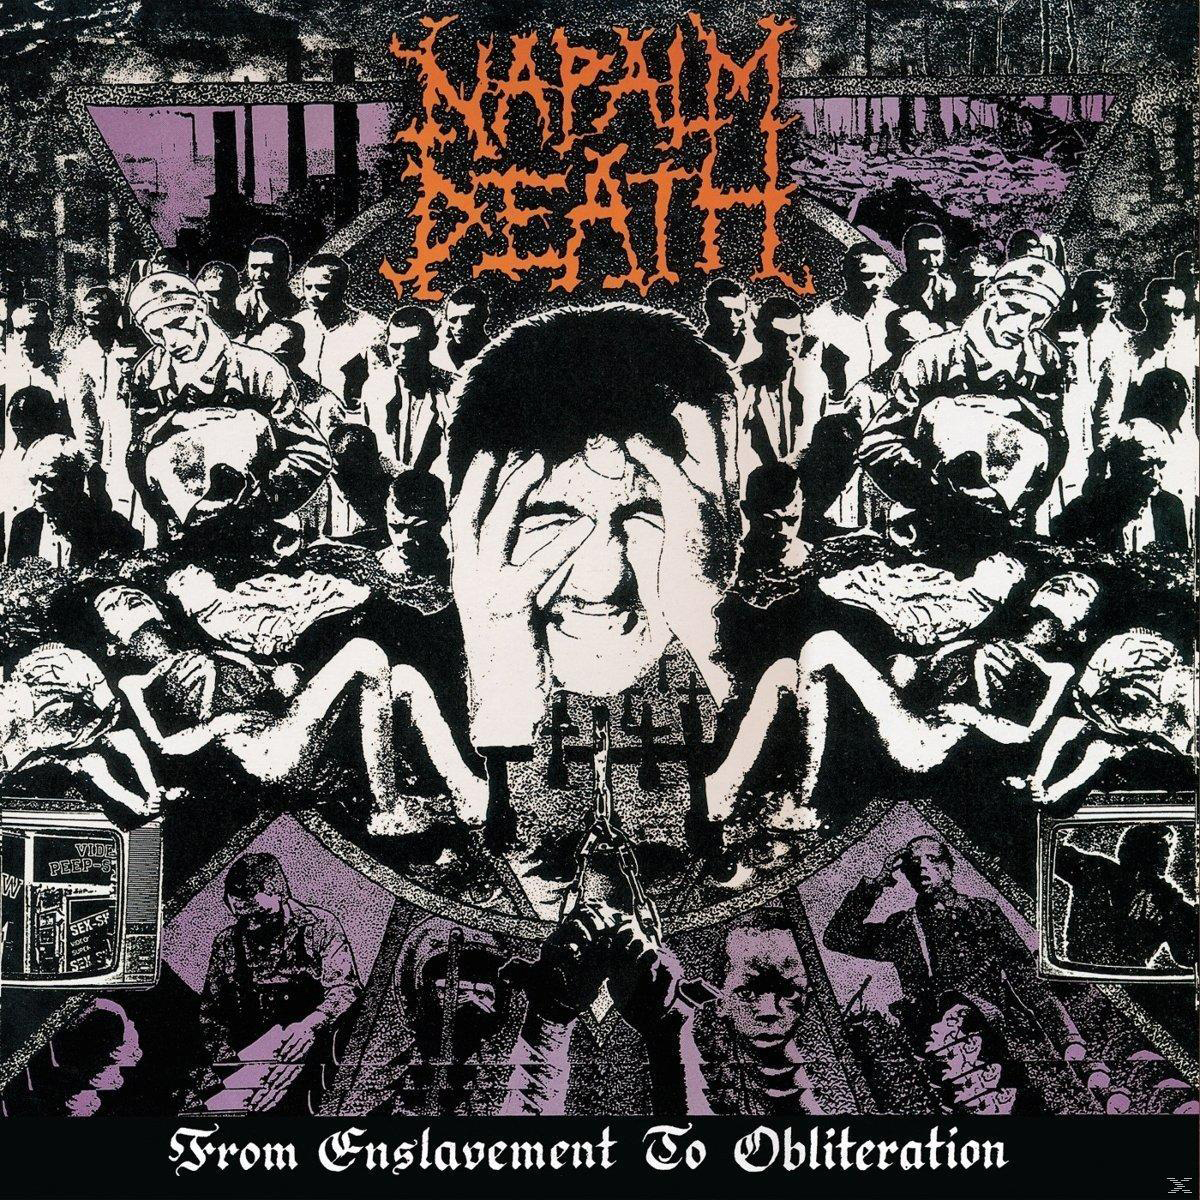 Napalm Death - Obliteration (Vinyl) Enslavement - From to